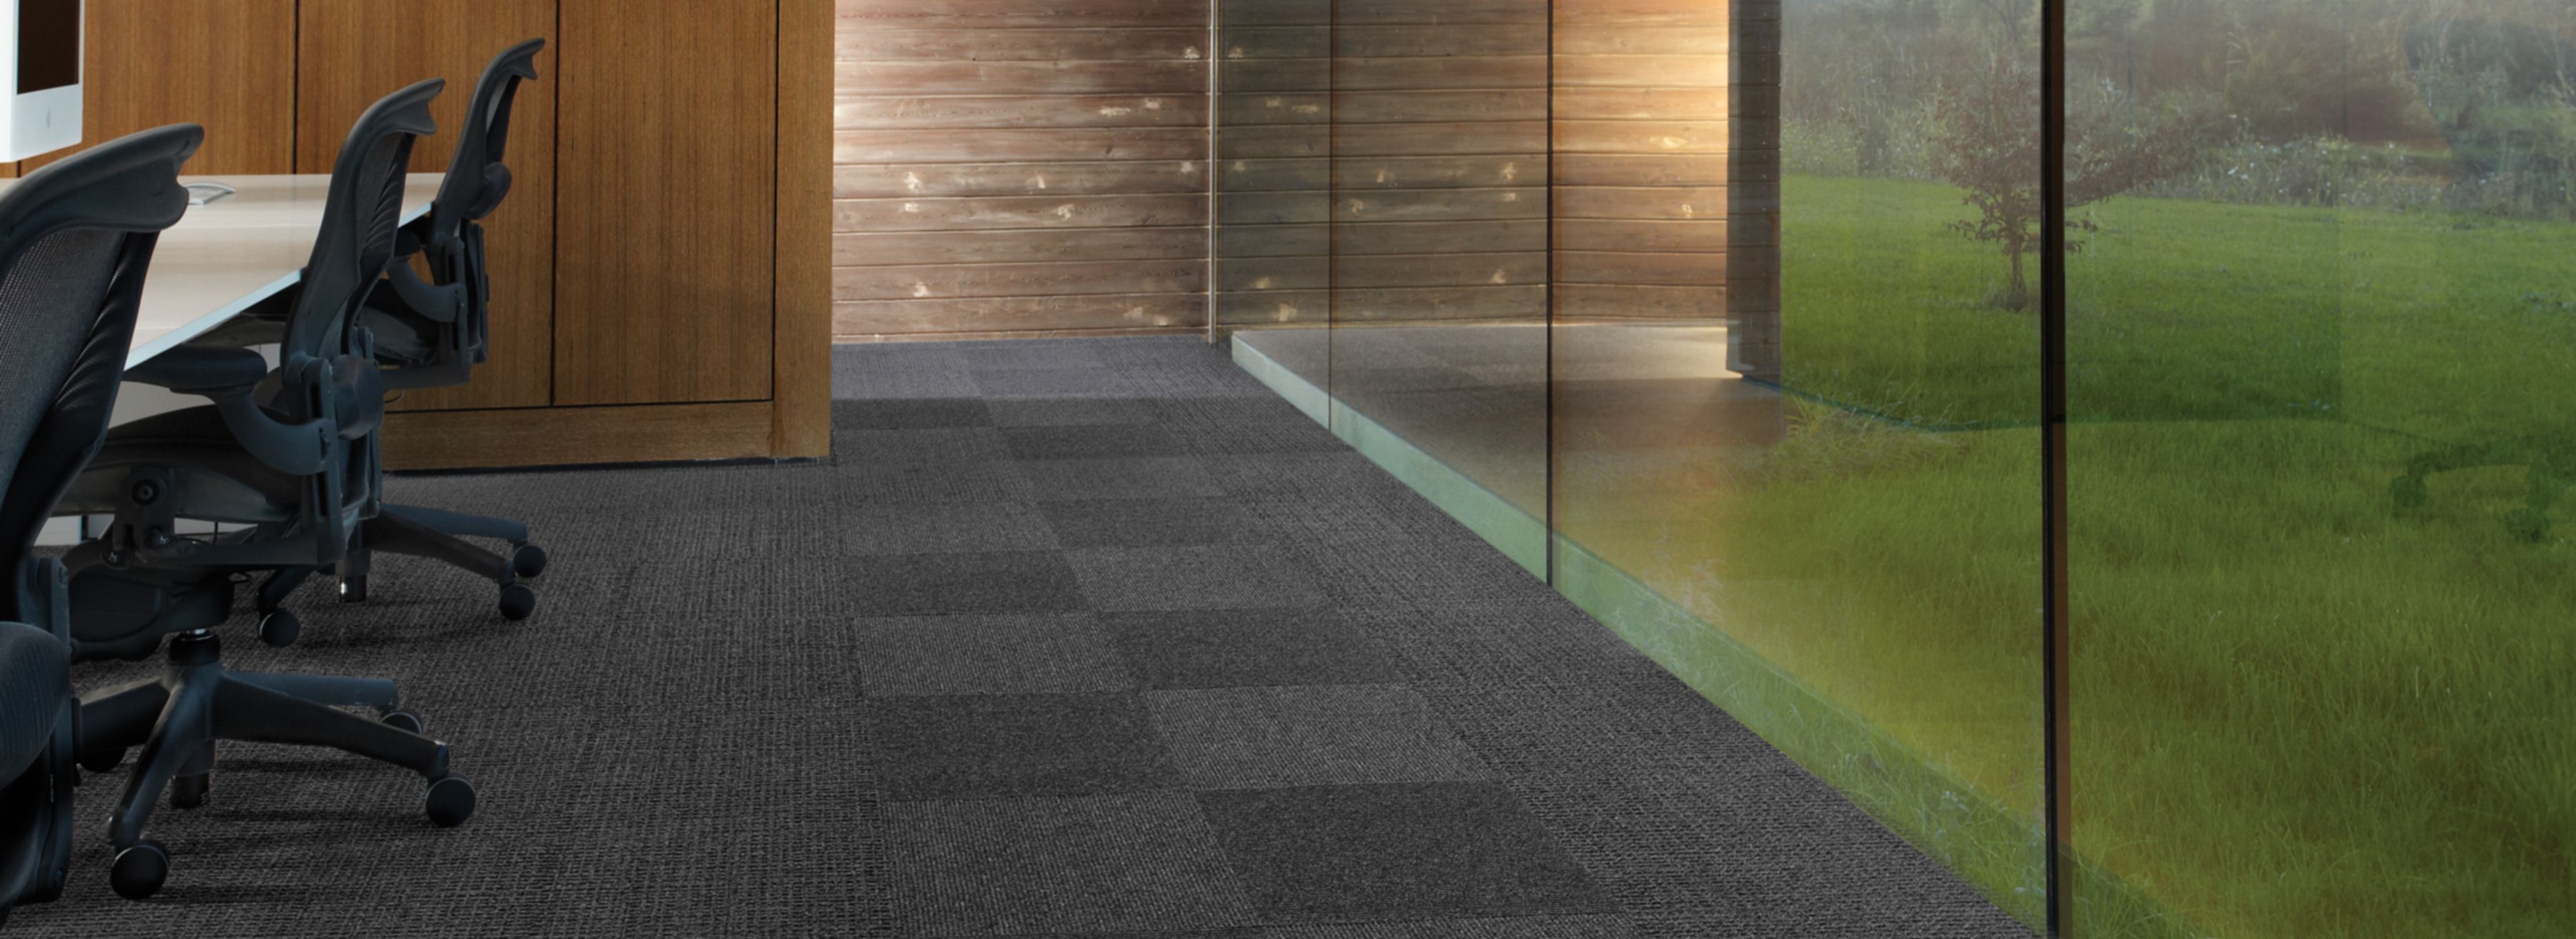 Interface UR202 and UR203 carpet tile in conference room with glass wall image number 1